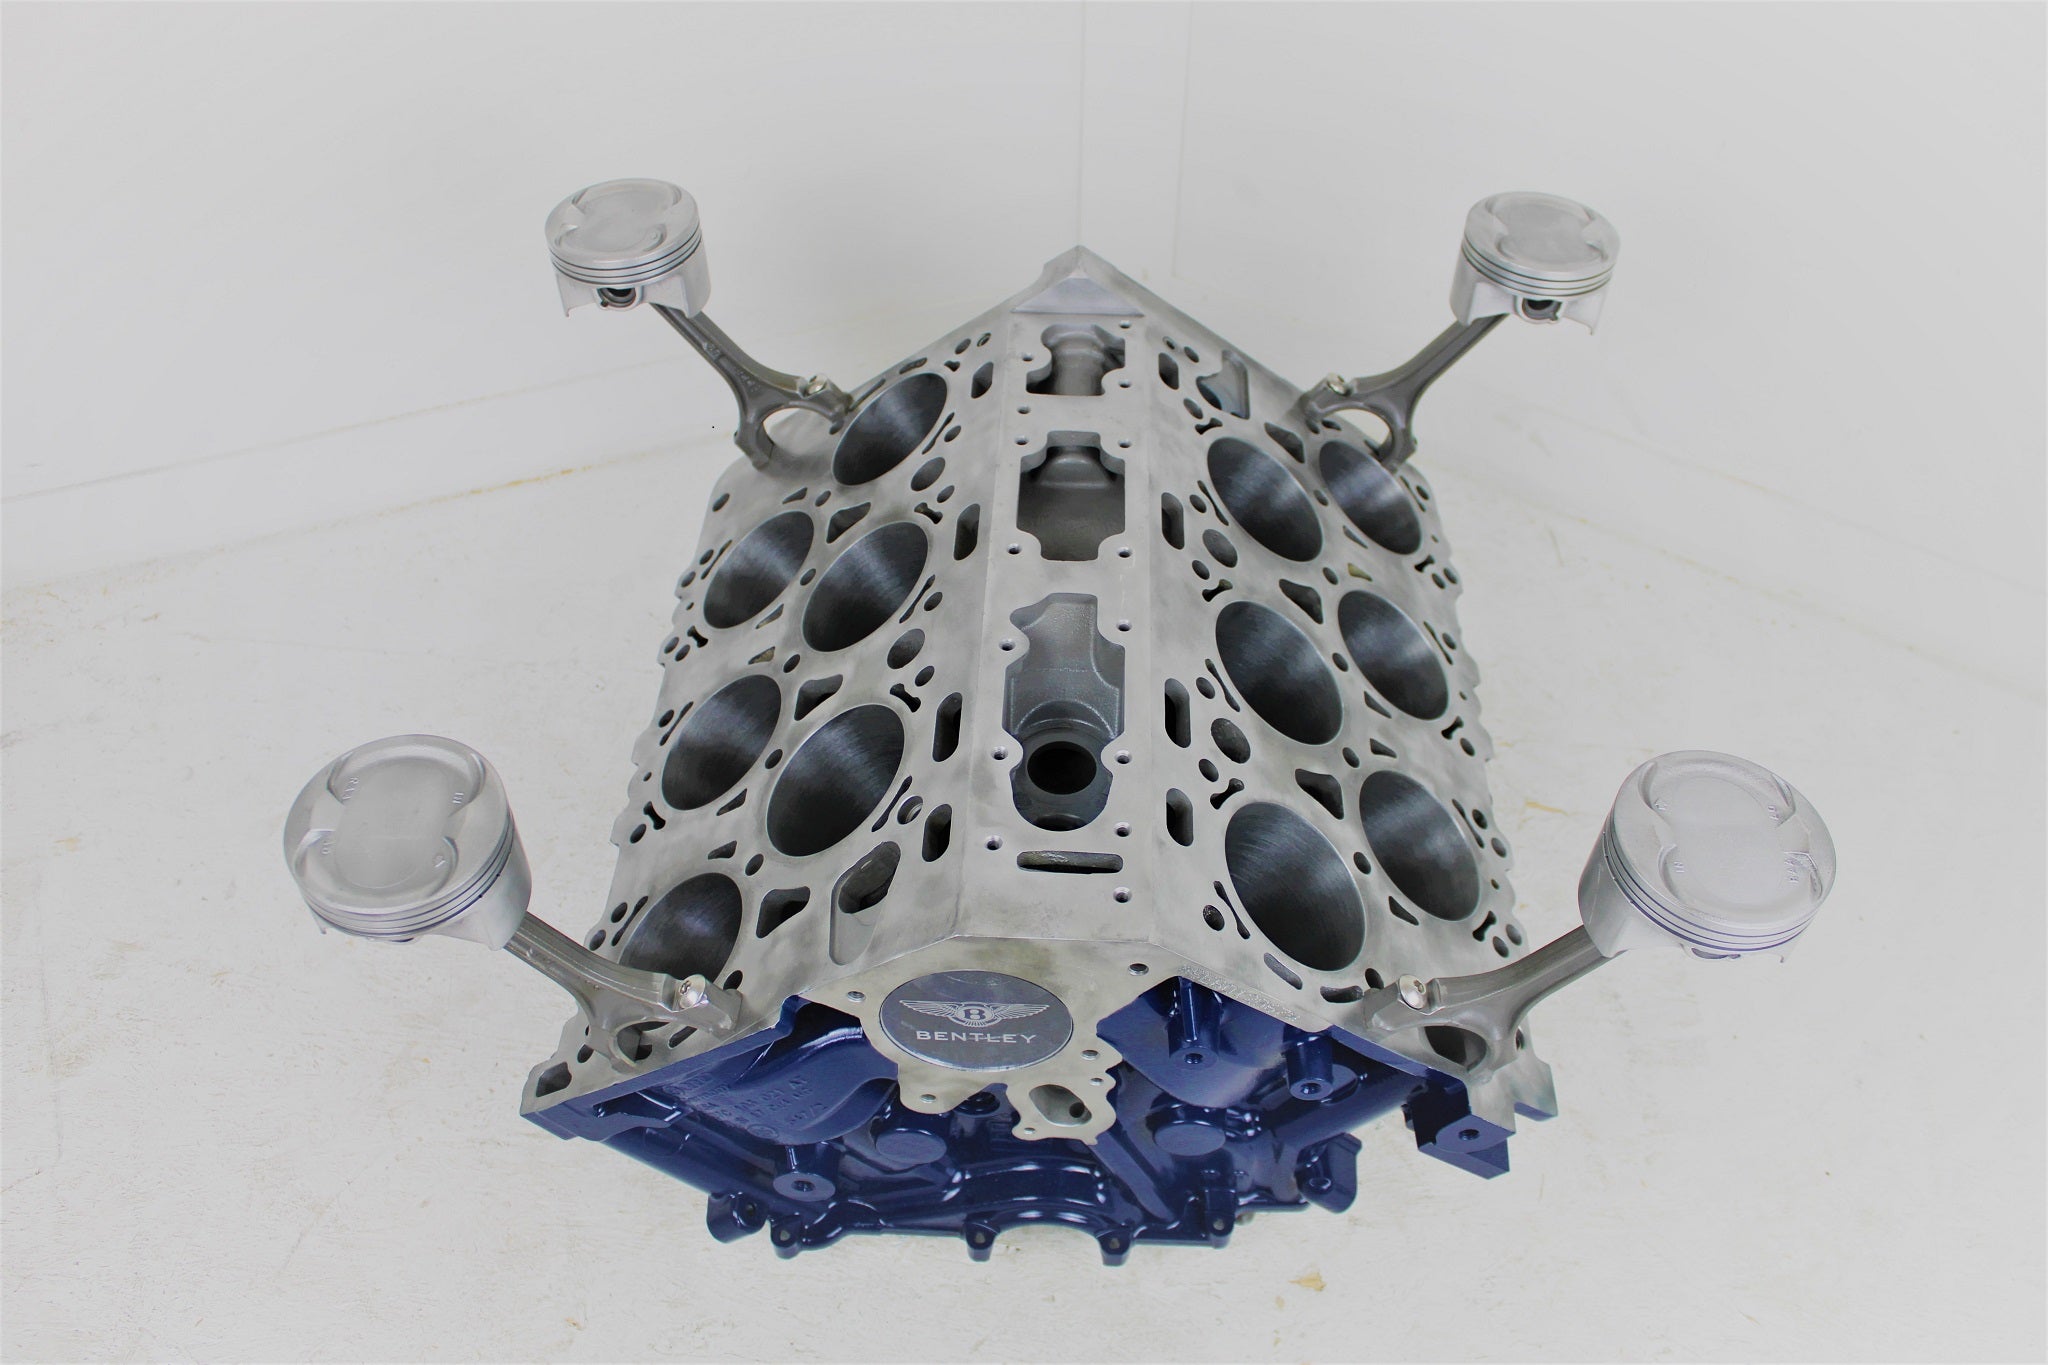 Bentley engine block coffee table without its glass top. The table is painted dark blue, with the Bentley logo displayed on the front.